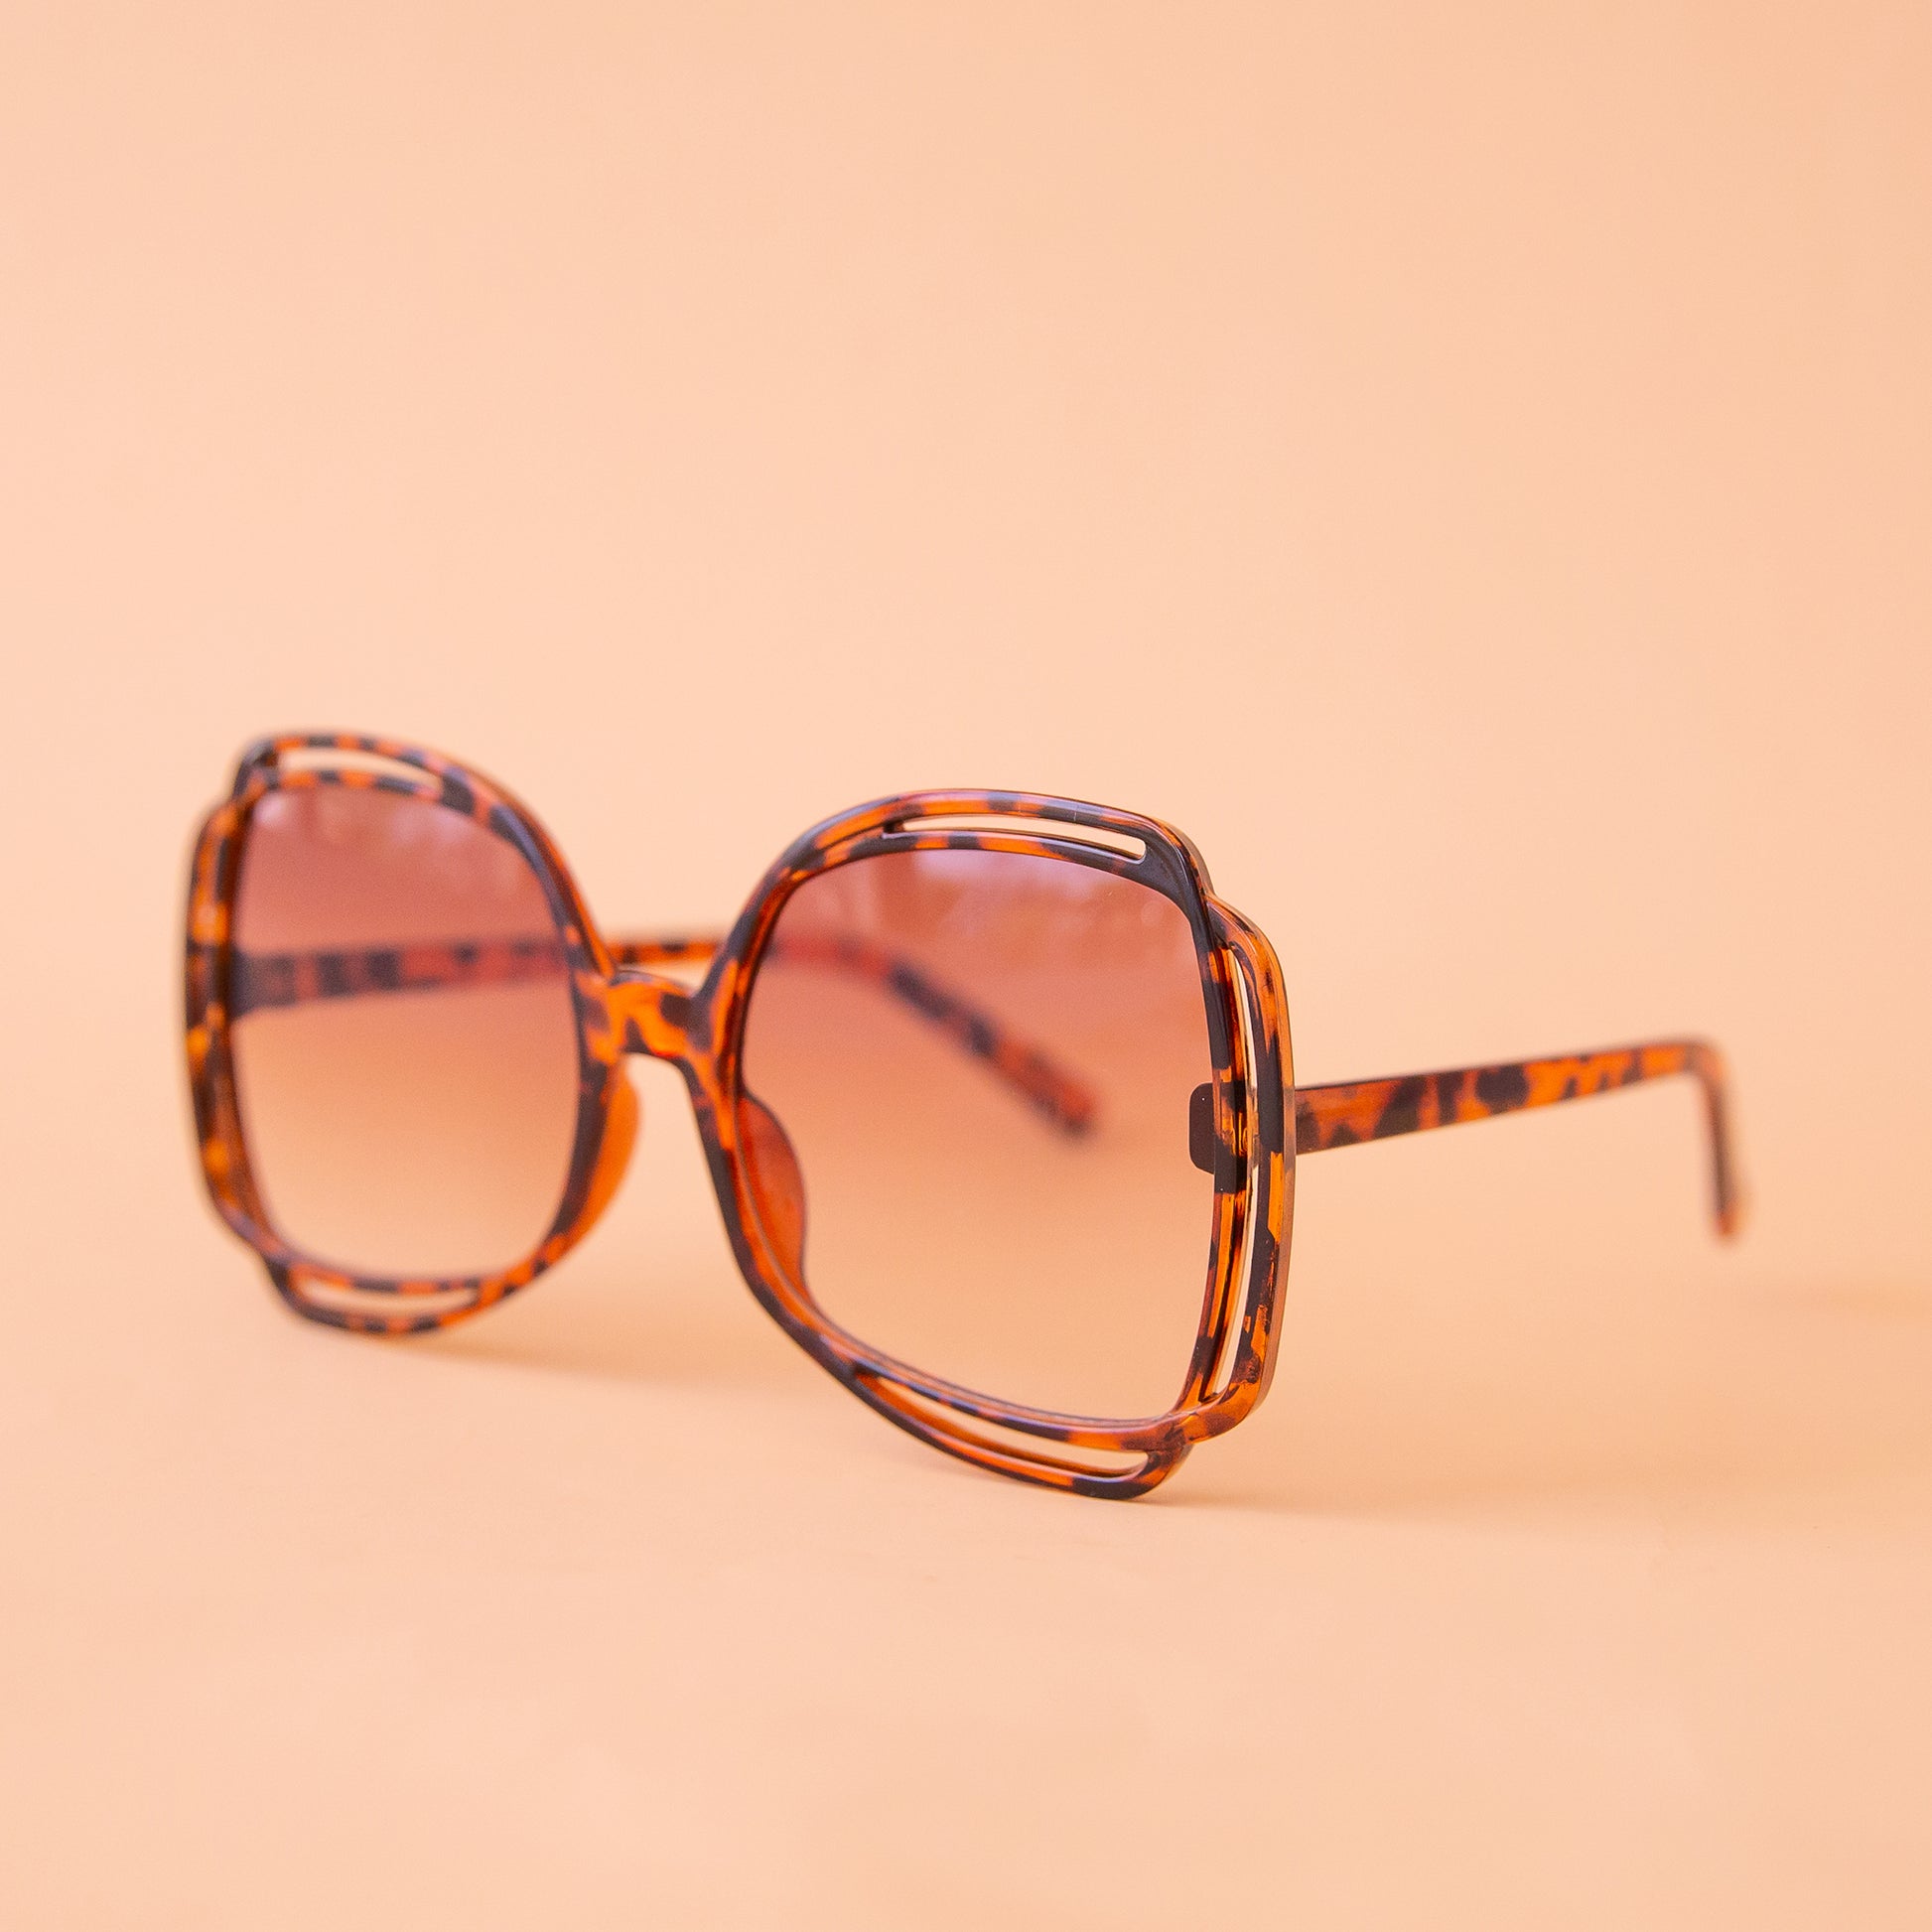 On a peachy background is a pair of tortoise sunglasses with a round frame and a brownish pink lens.